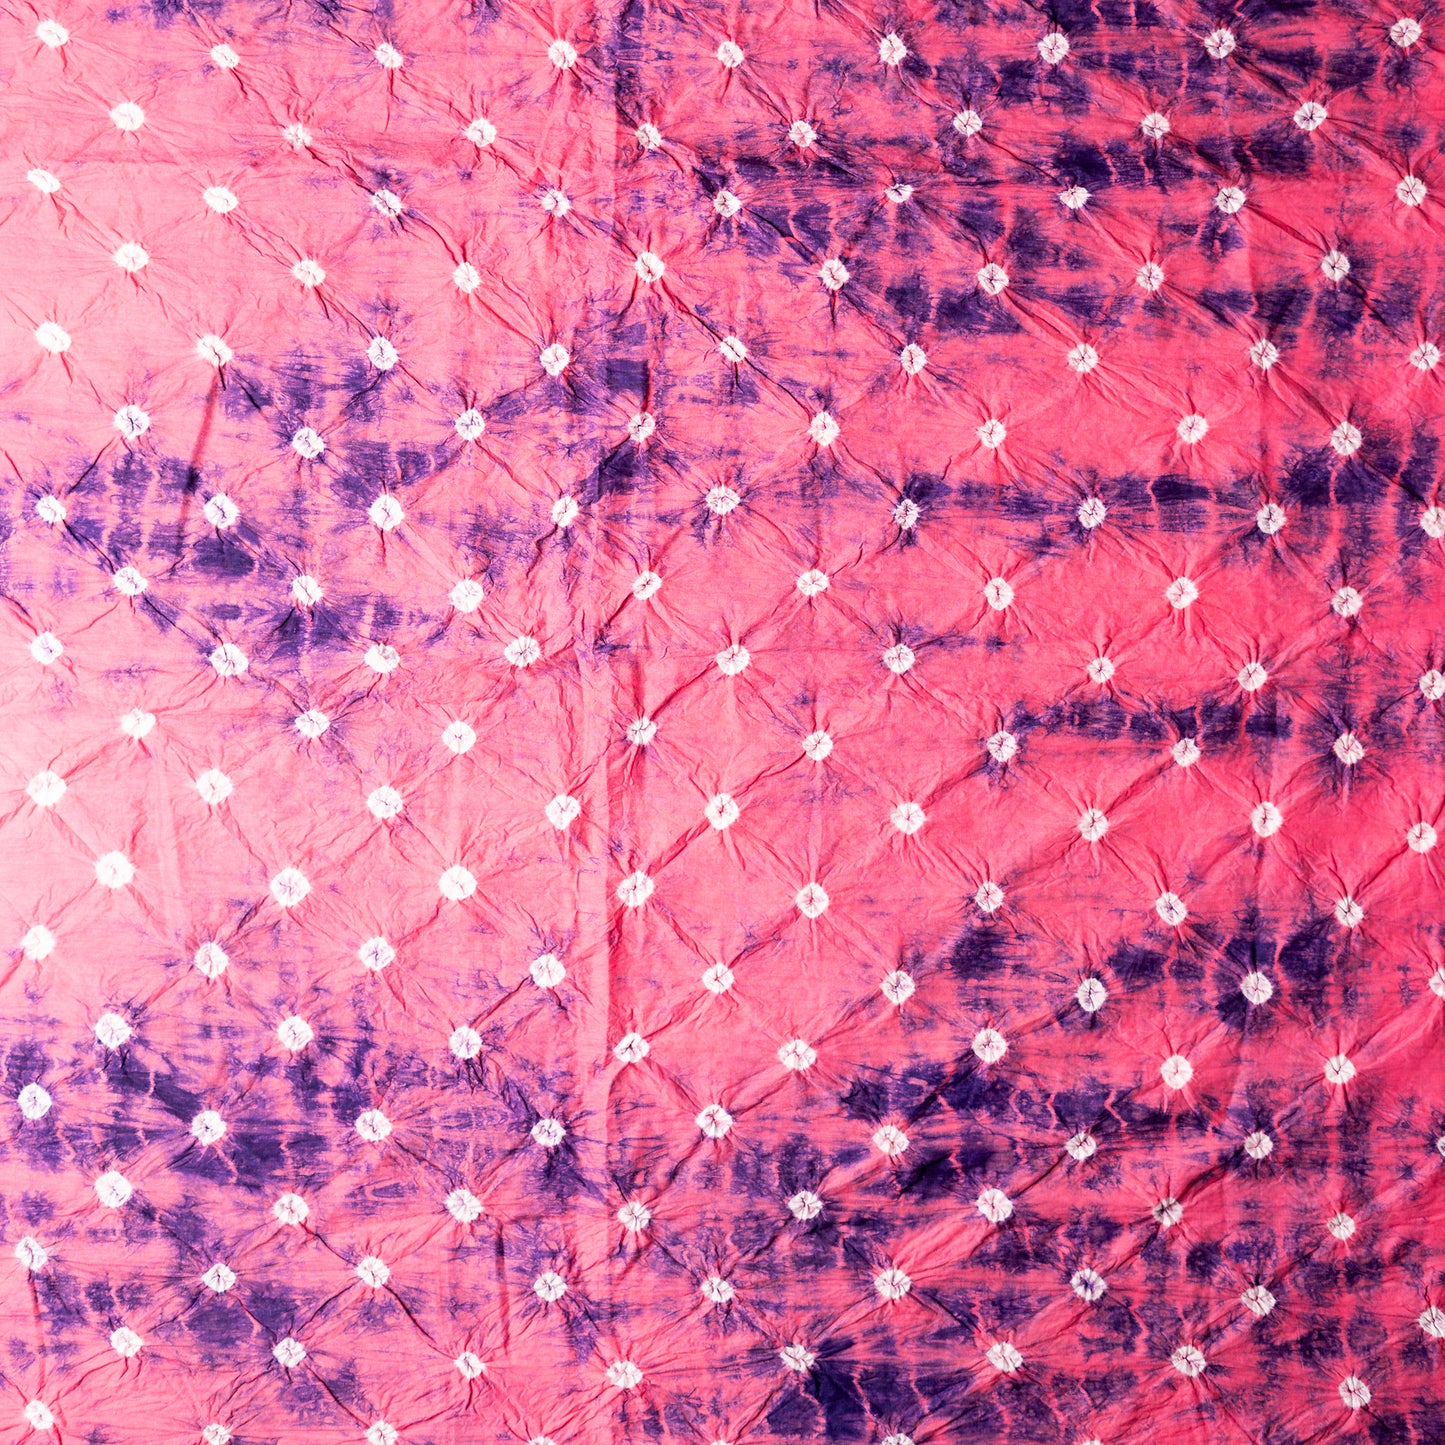 Pink color bottom with shibori designs in blue.